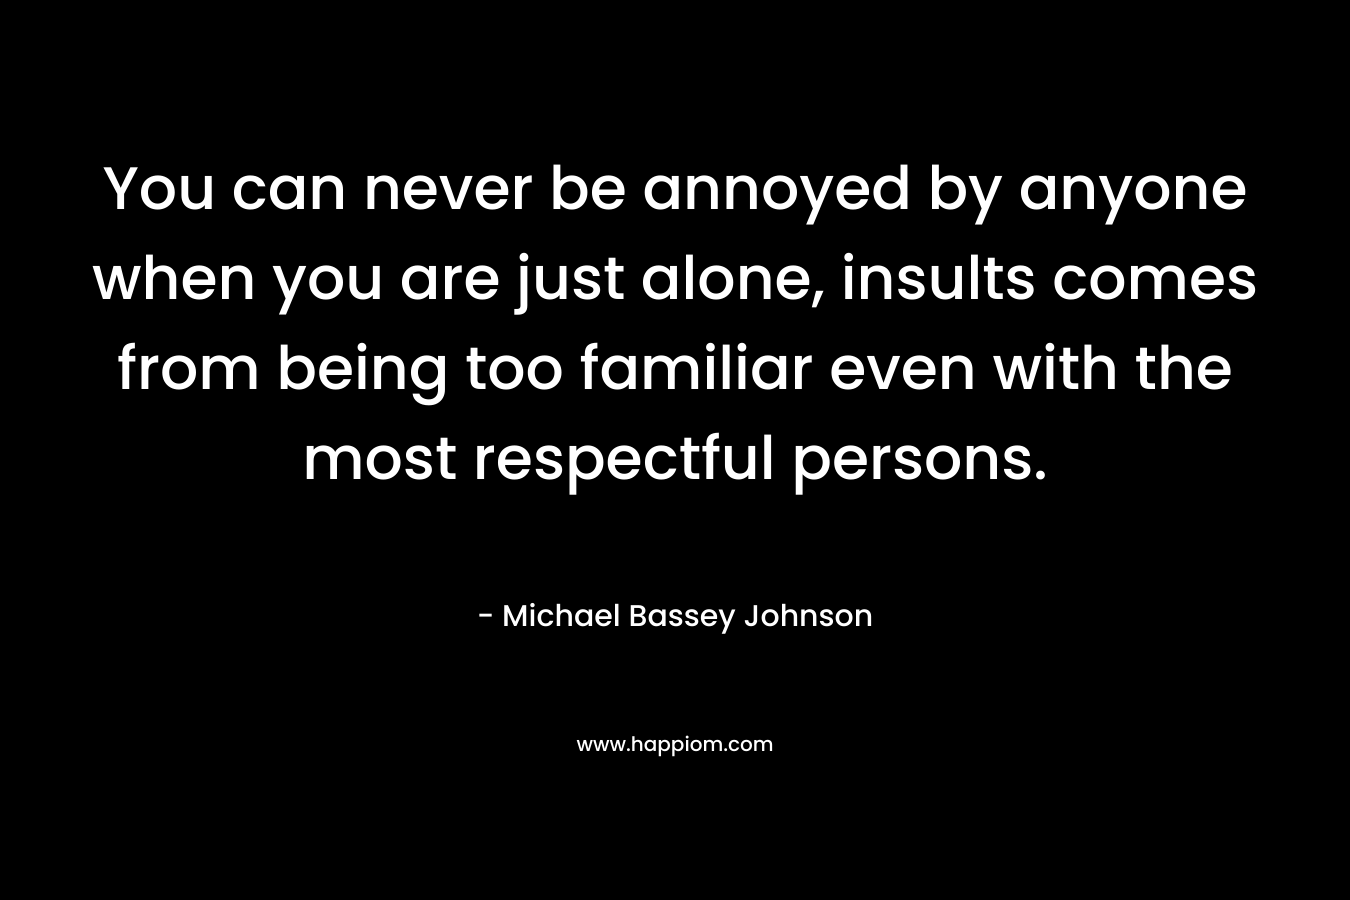 You can never be annoyed by anyone when you are just alone, insults comes from being too familiar even with the most respectful persons. – Michael Bassey Johnson